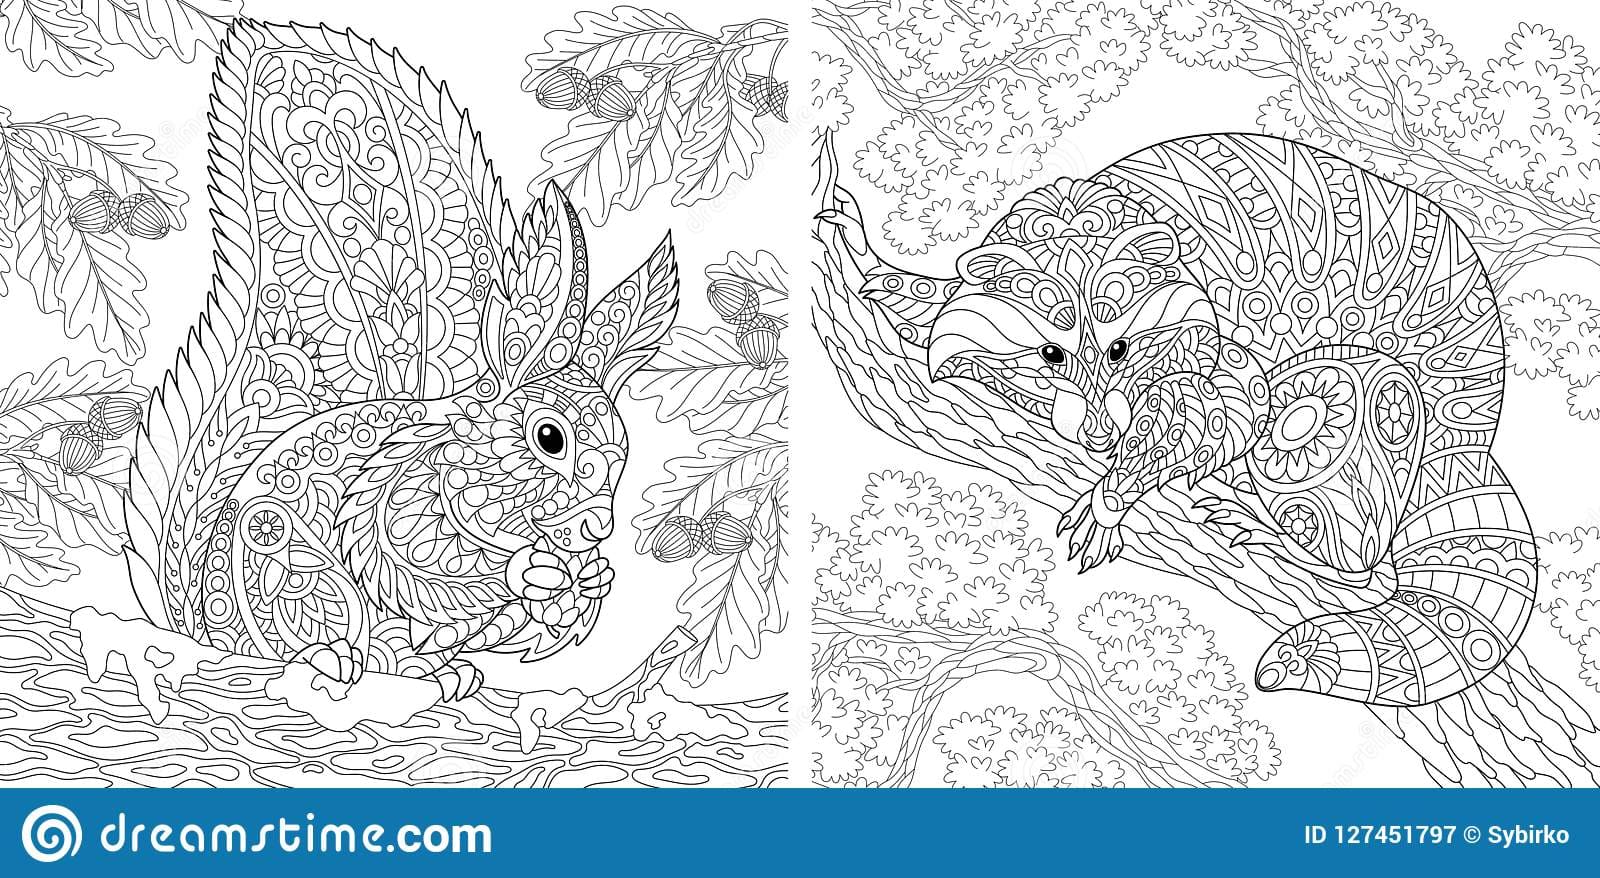 Coloring pages With Squirrel And Raccoon Coloring Page